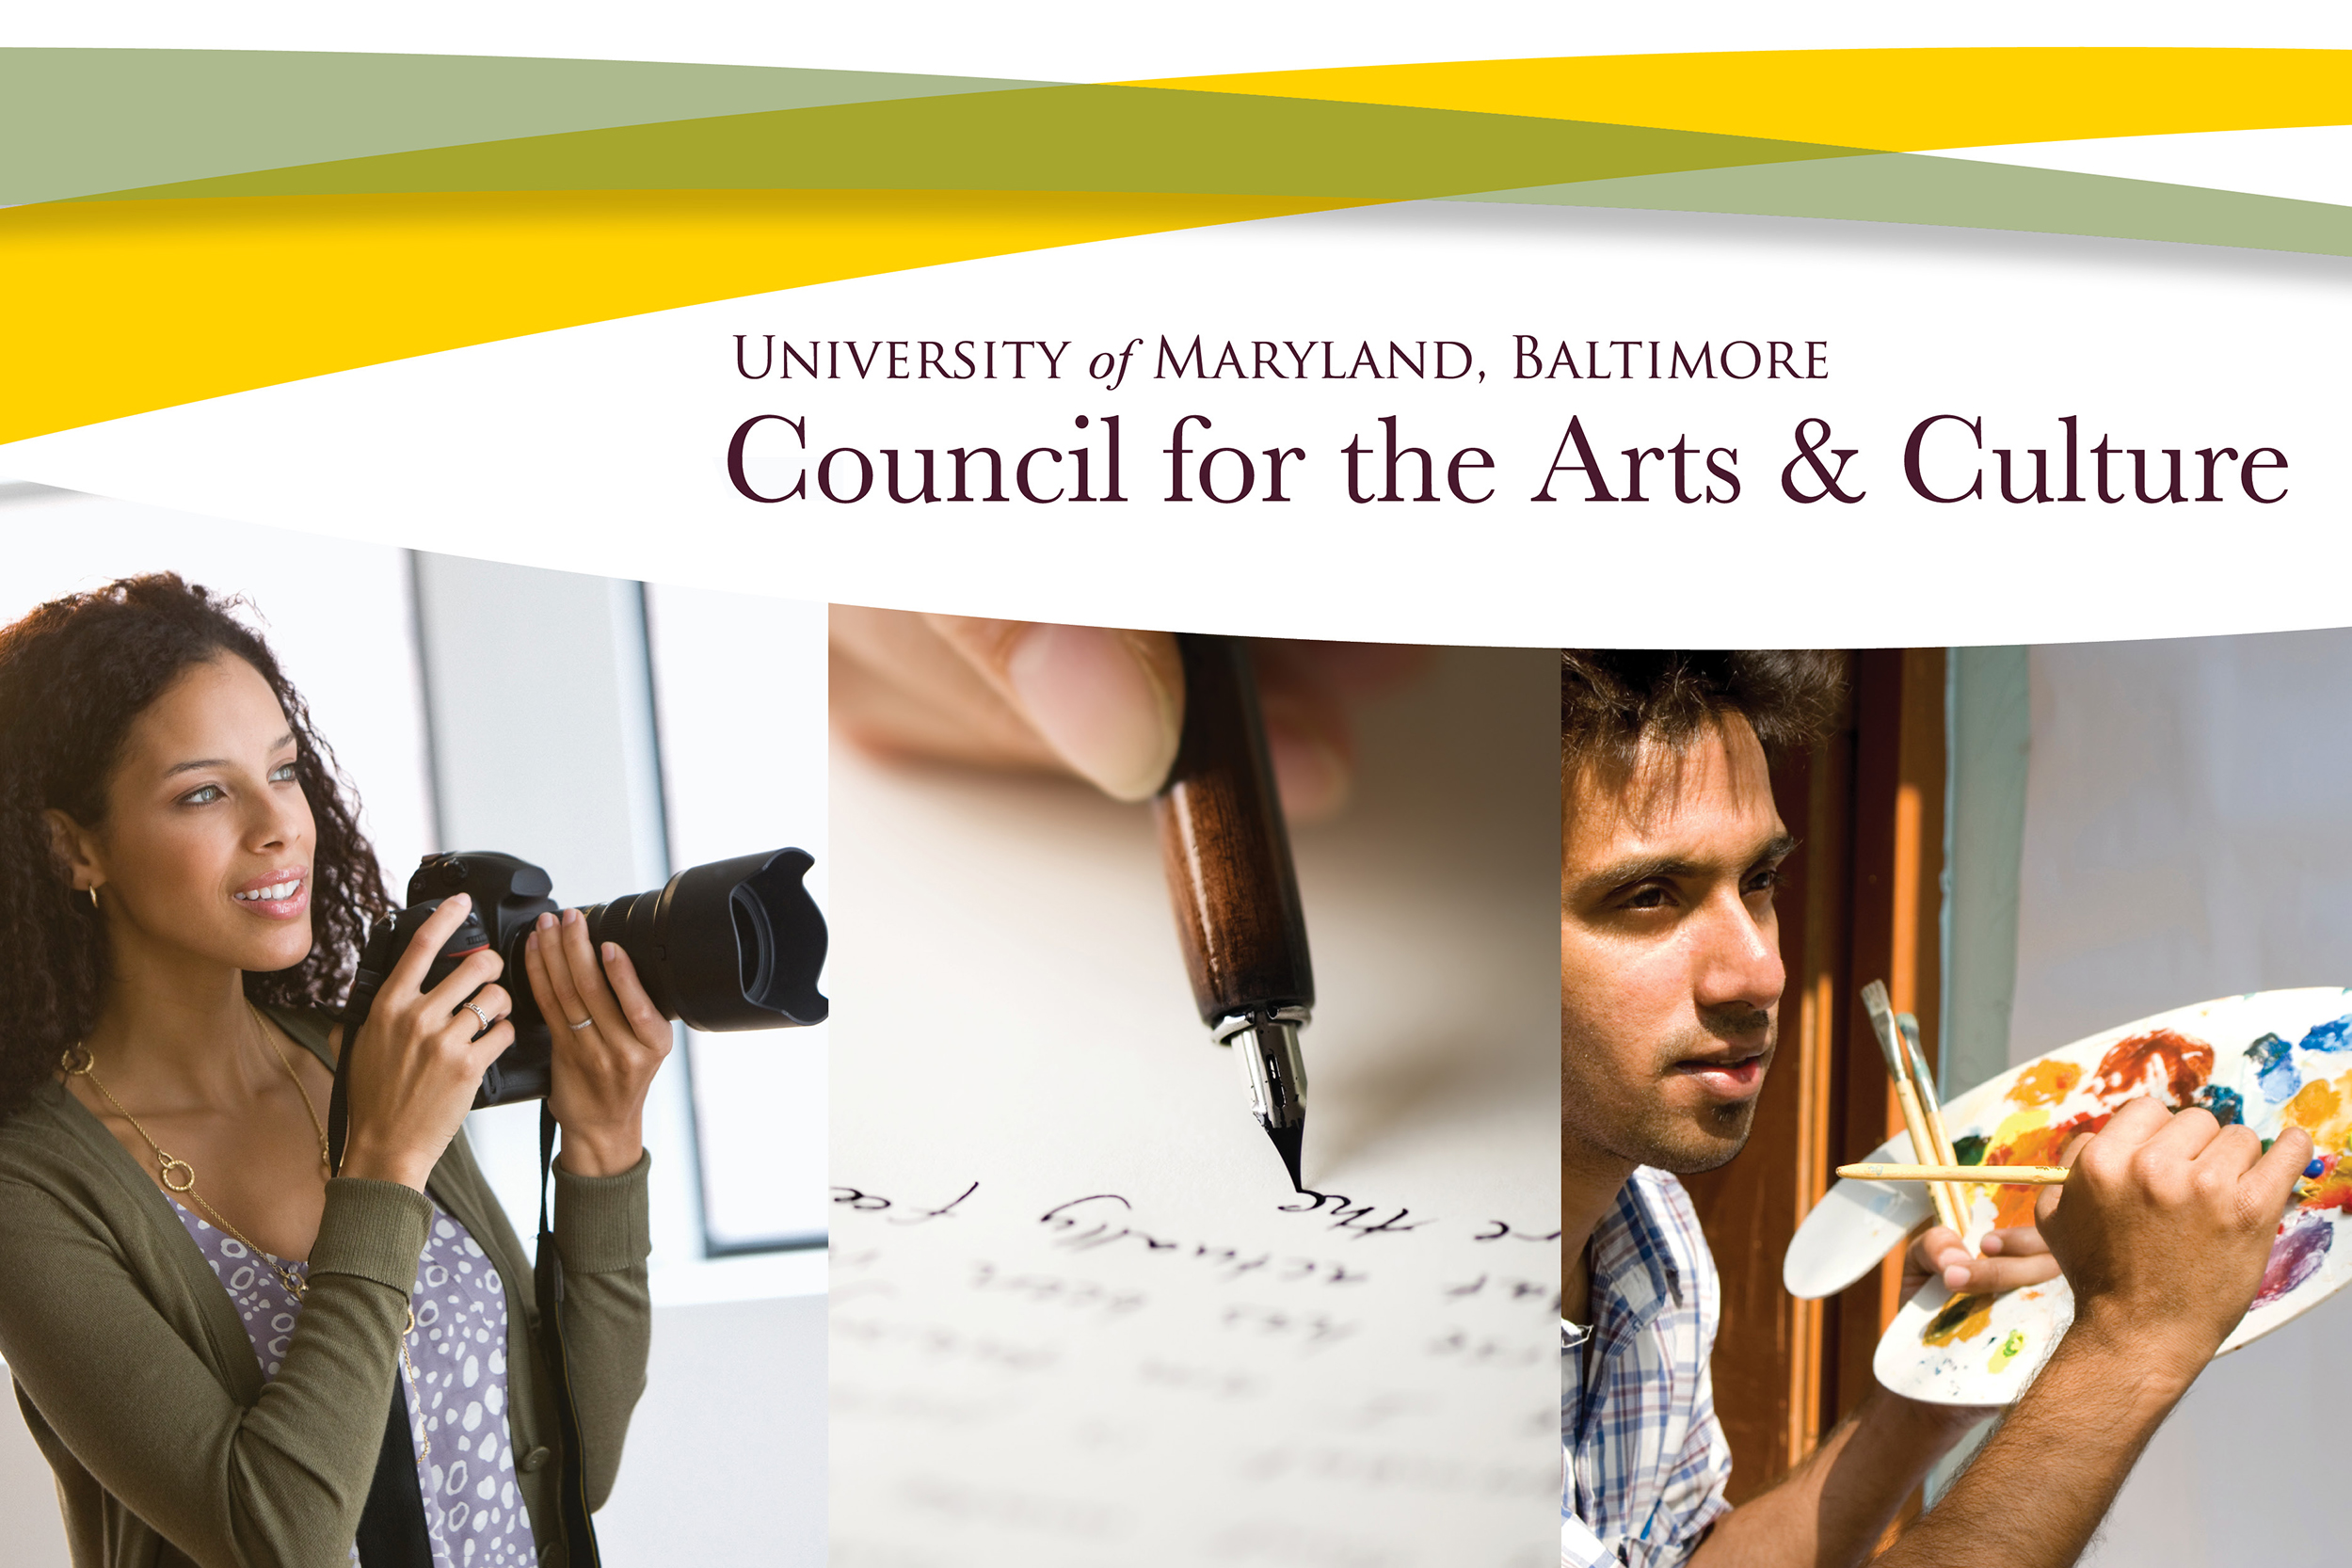 Branded look for the UMB Council for the Arts & Culture, with multimedia art forms represented.